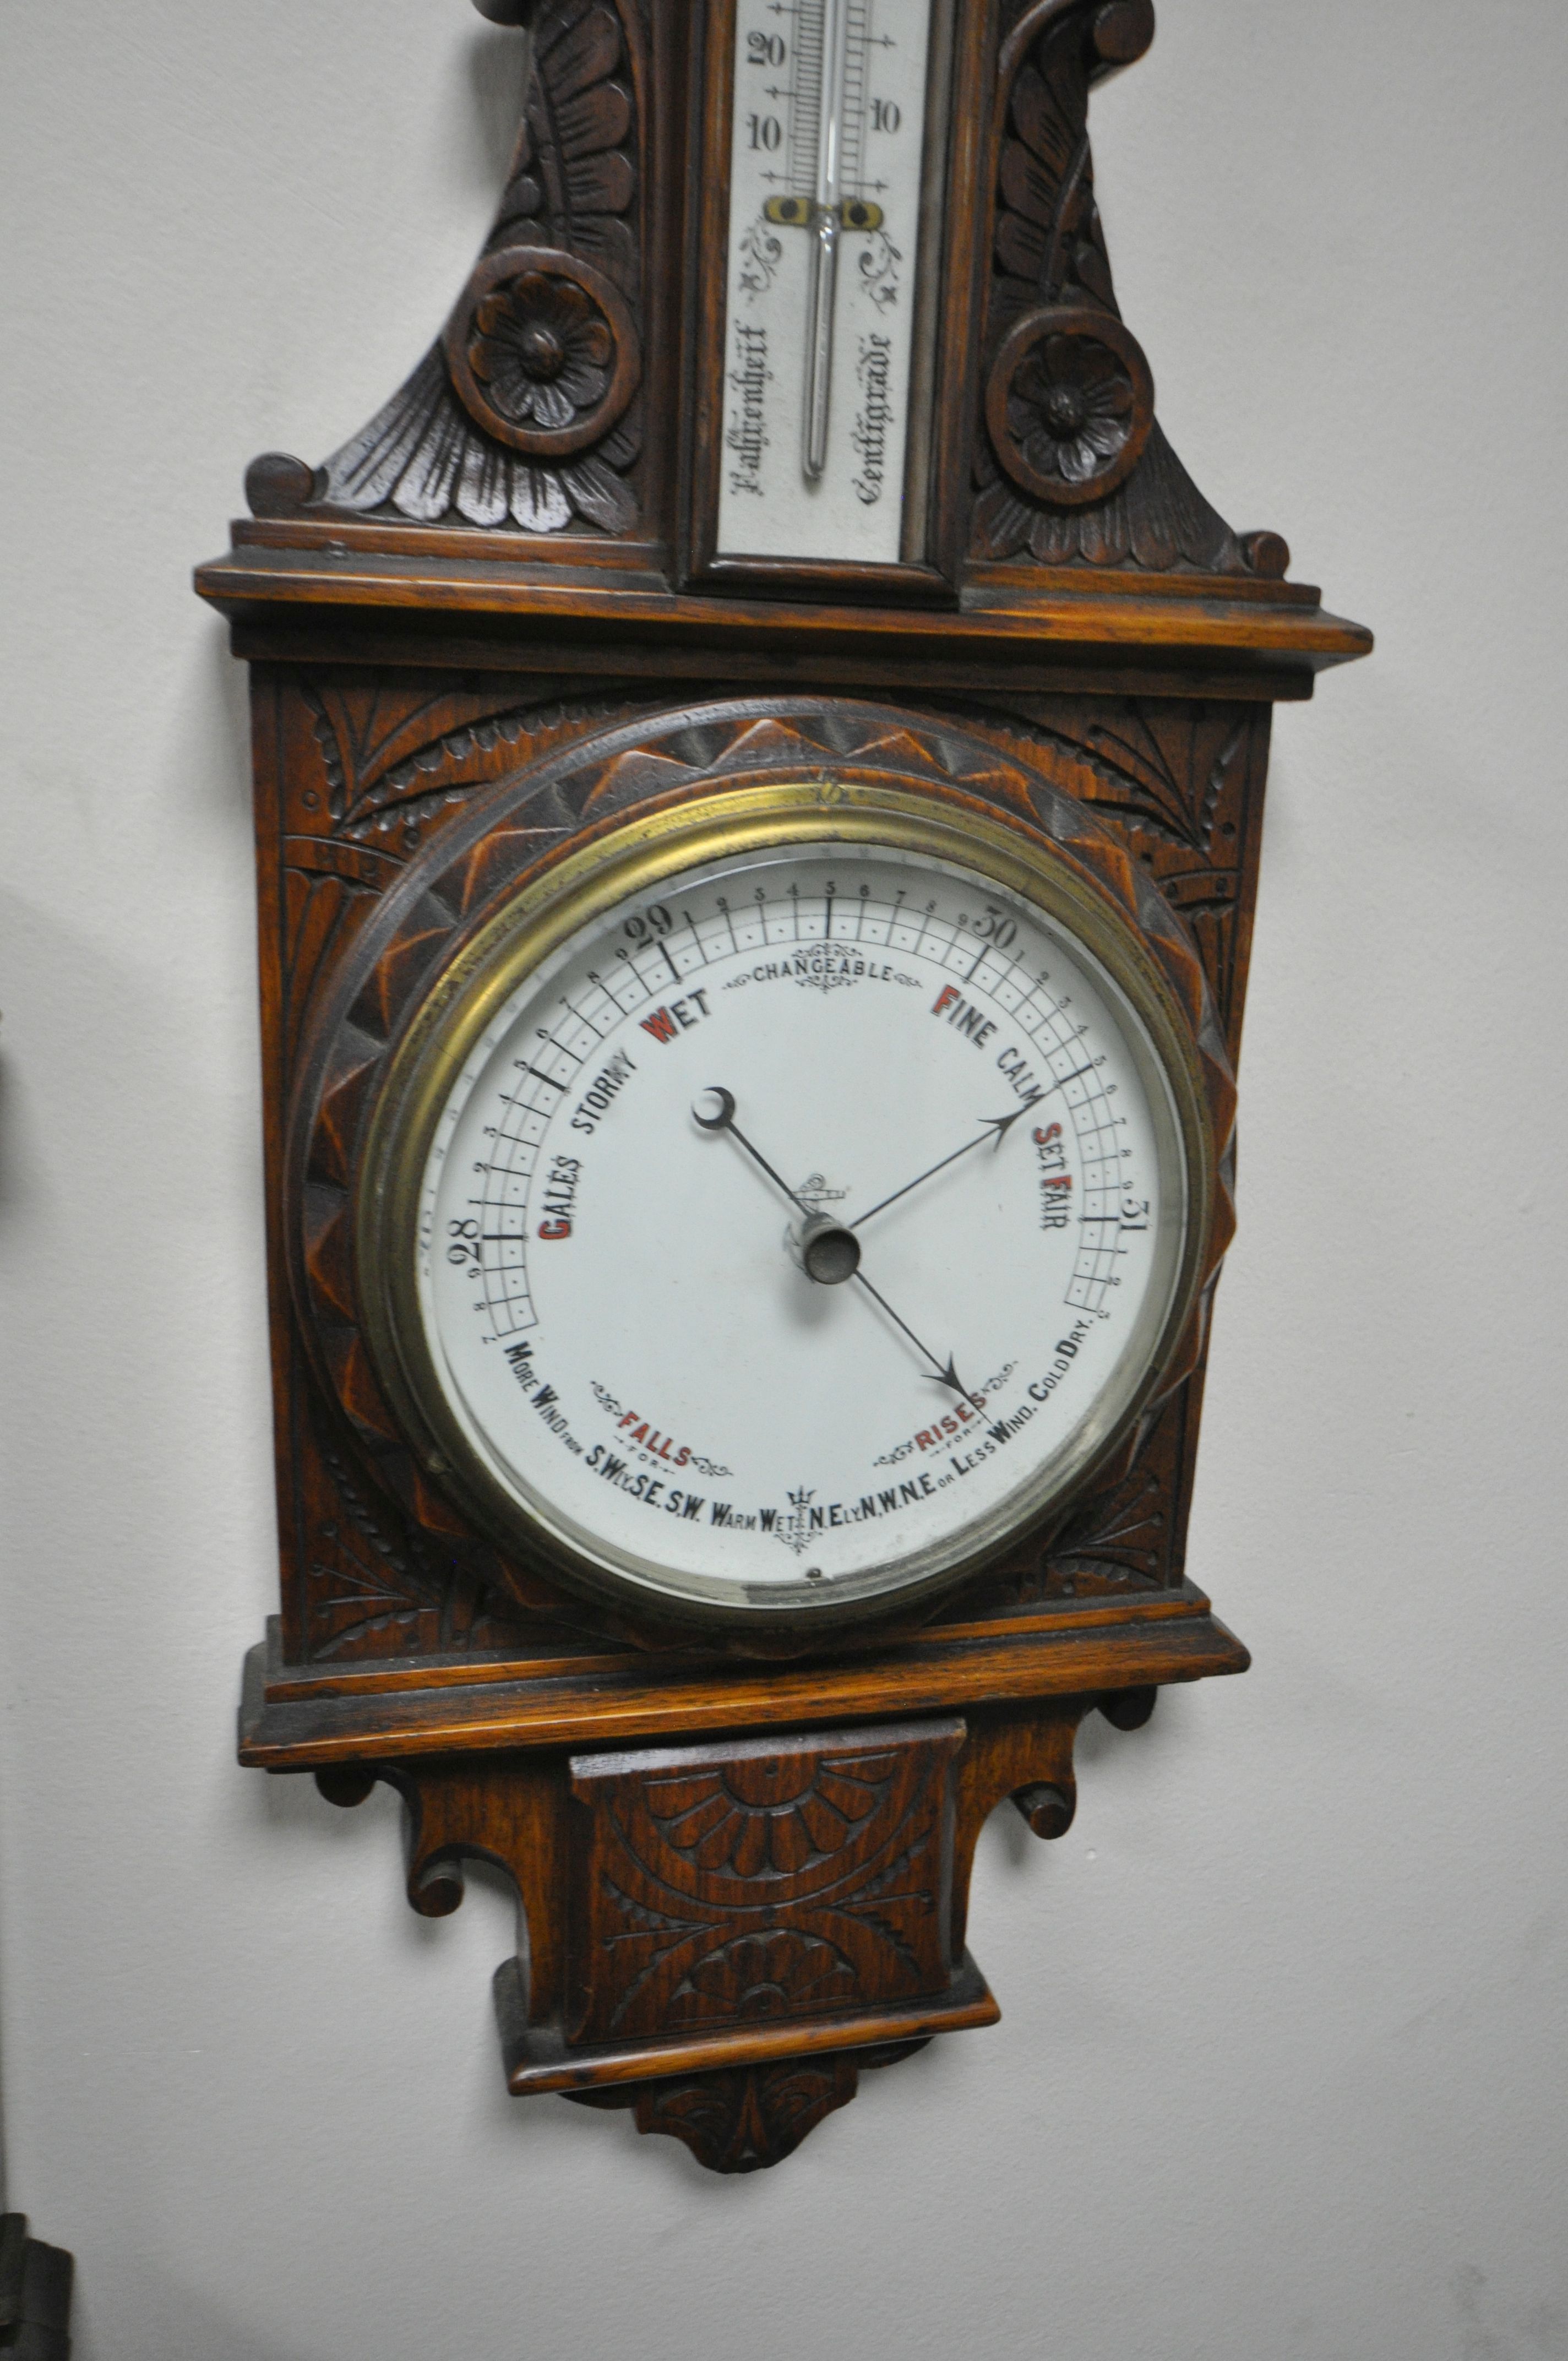 TWO LATE 19TH/EARLY 20TH CENTURY CARVED OAK ANEROID BAROMETERS, with clock dials and thermometers, - Image 5 of 5